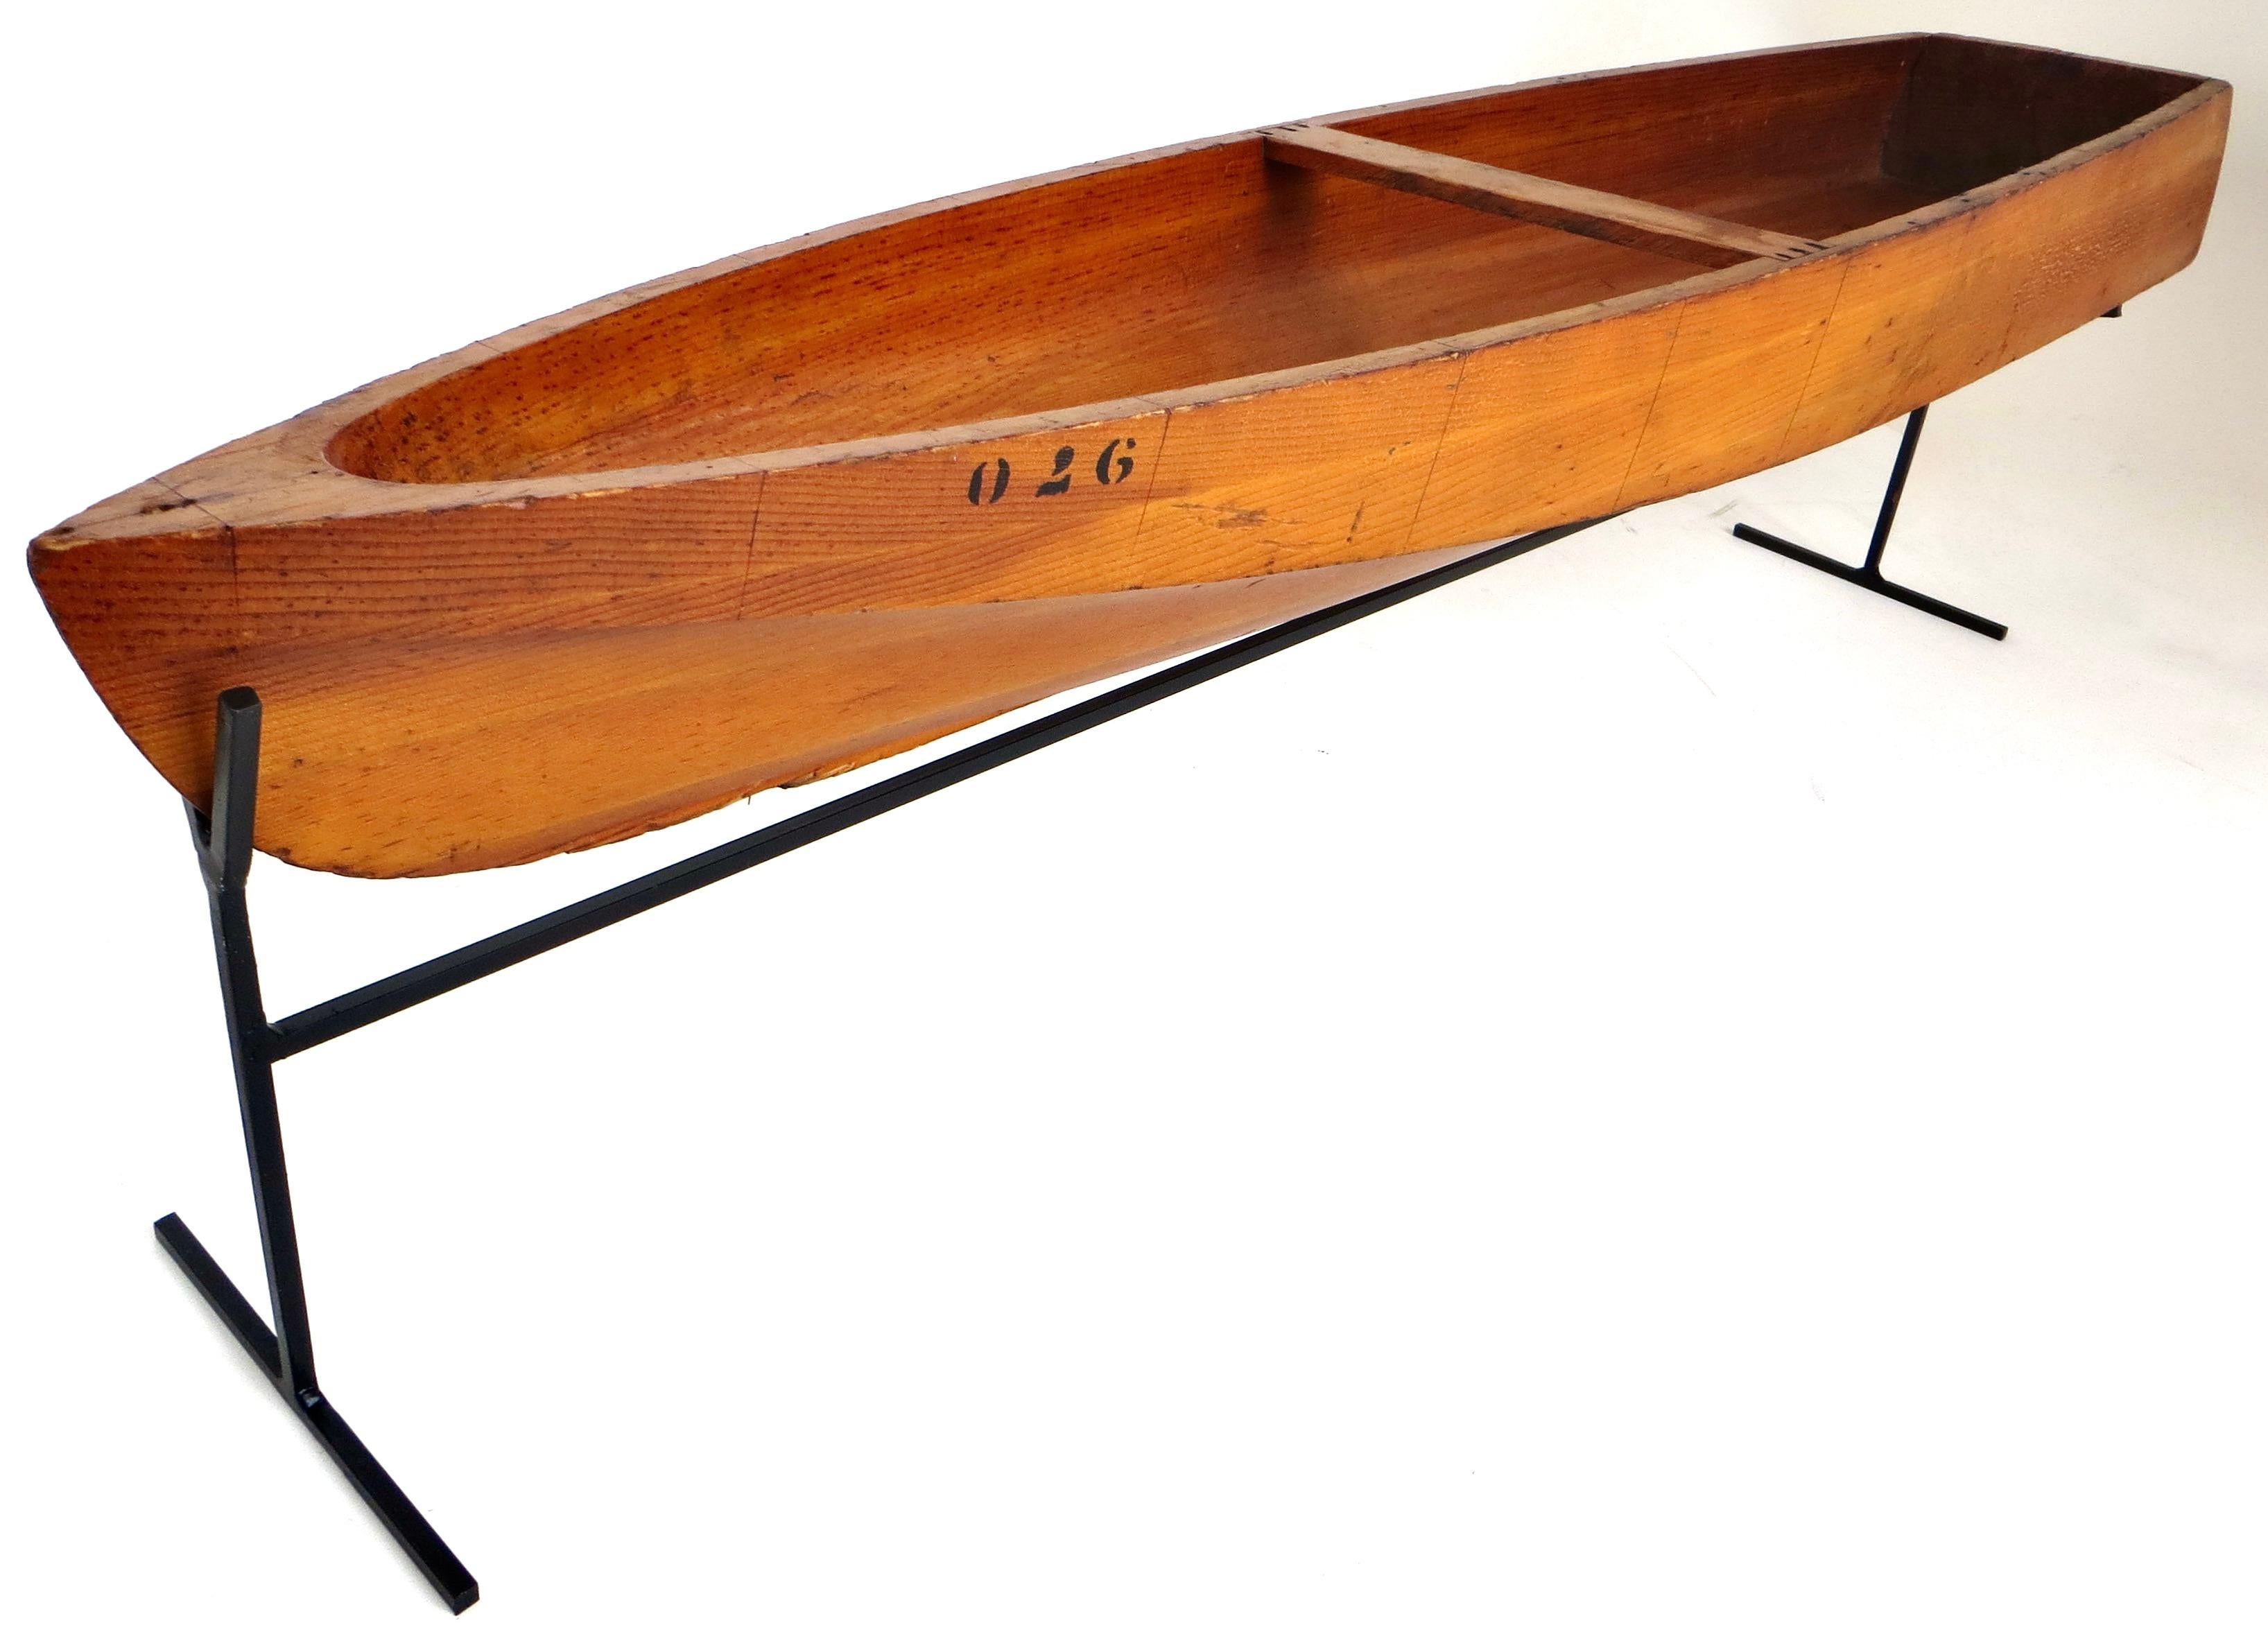 Very rare large size salesman sample skiff boat, circa 1865; hand carved out of a single piece of wood (perhaps maple) with Victorian period black print stenciling to the side in increments of 